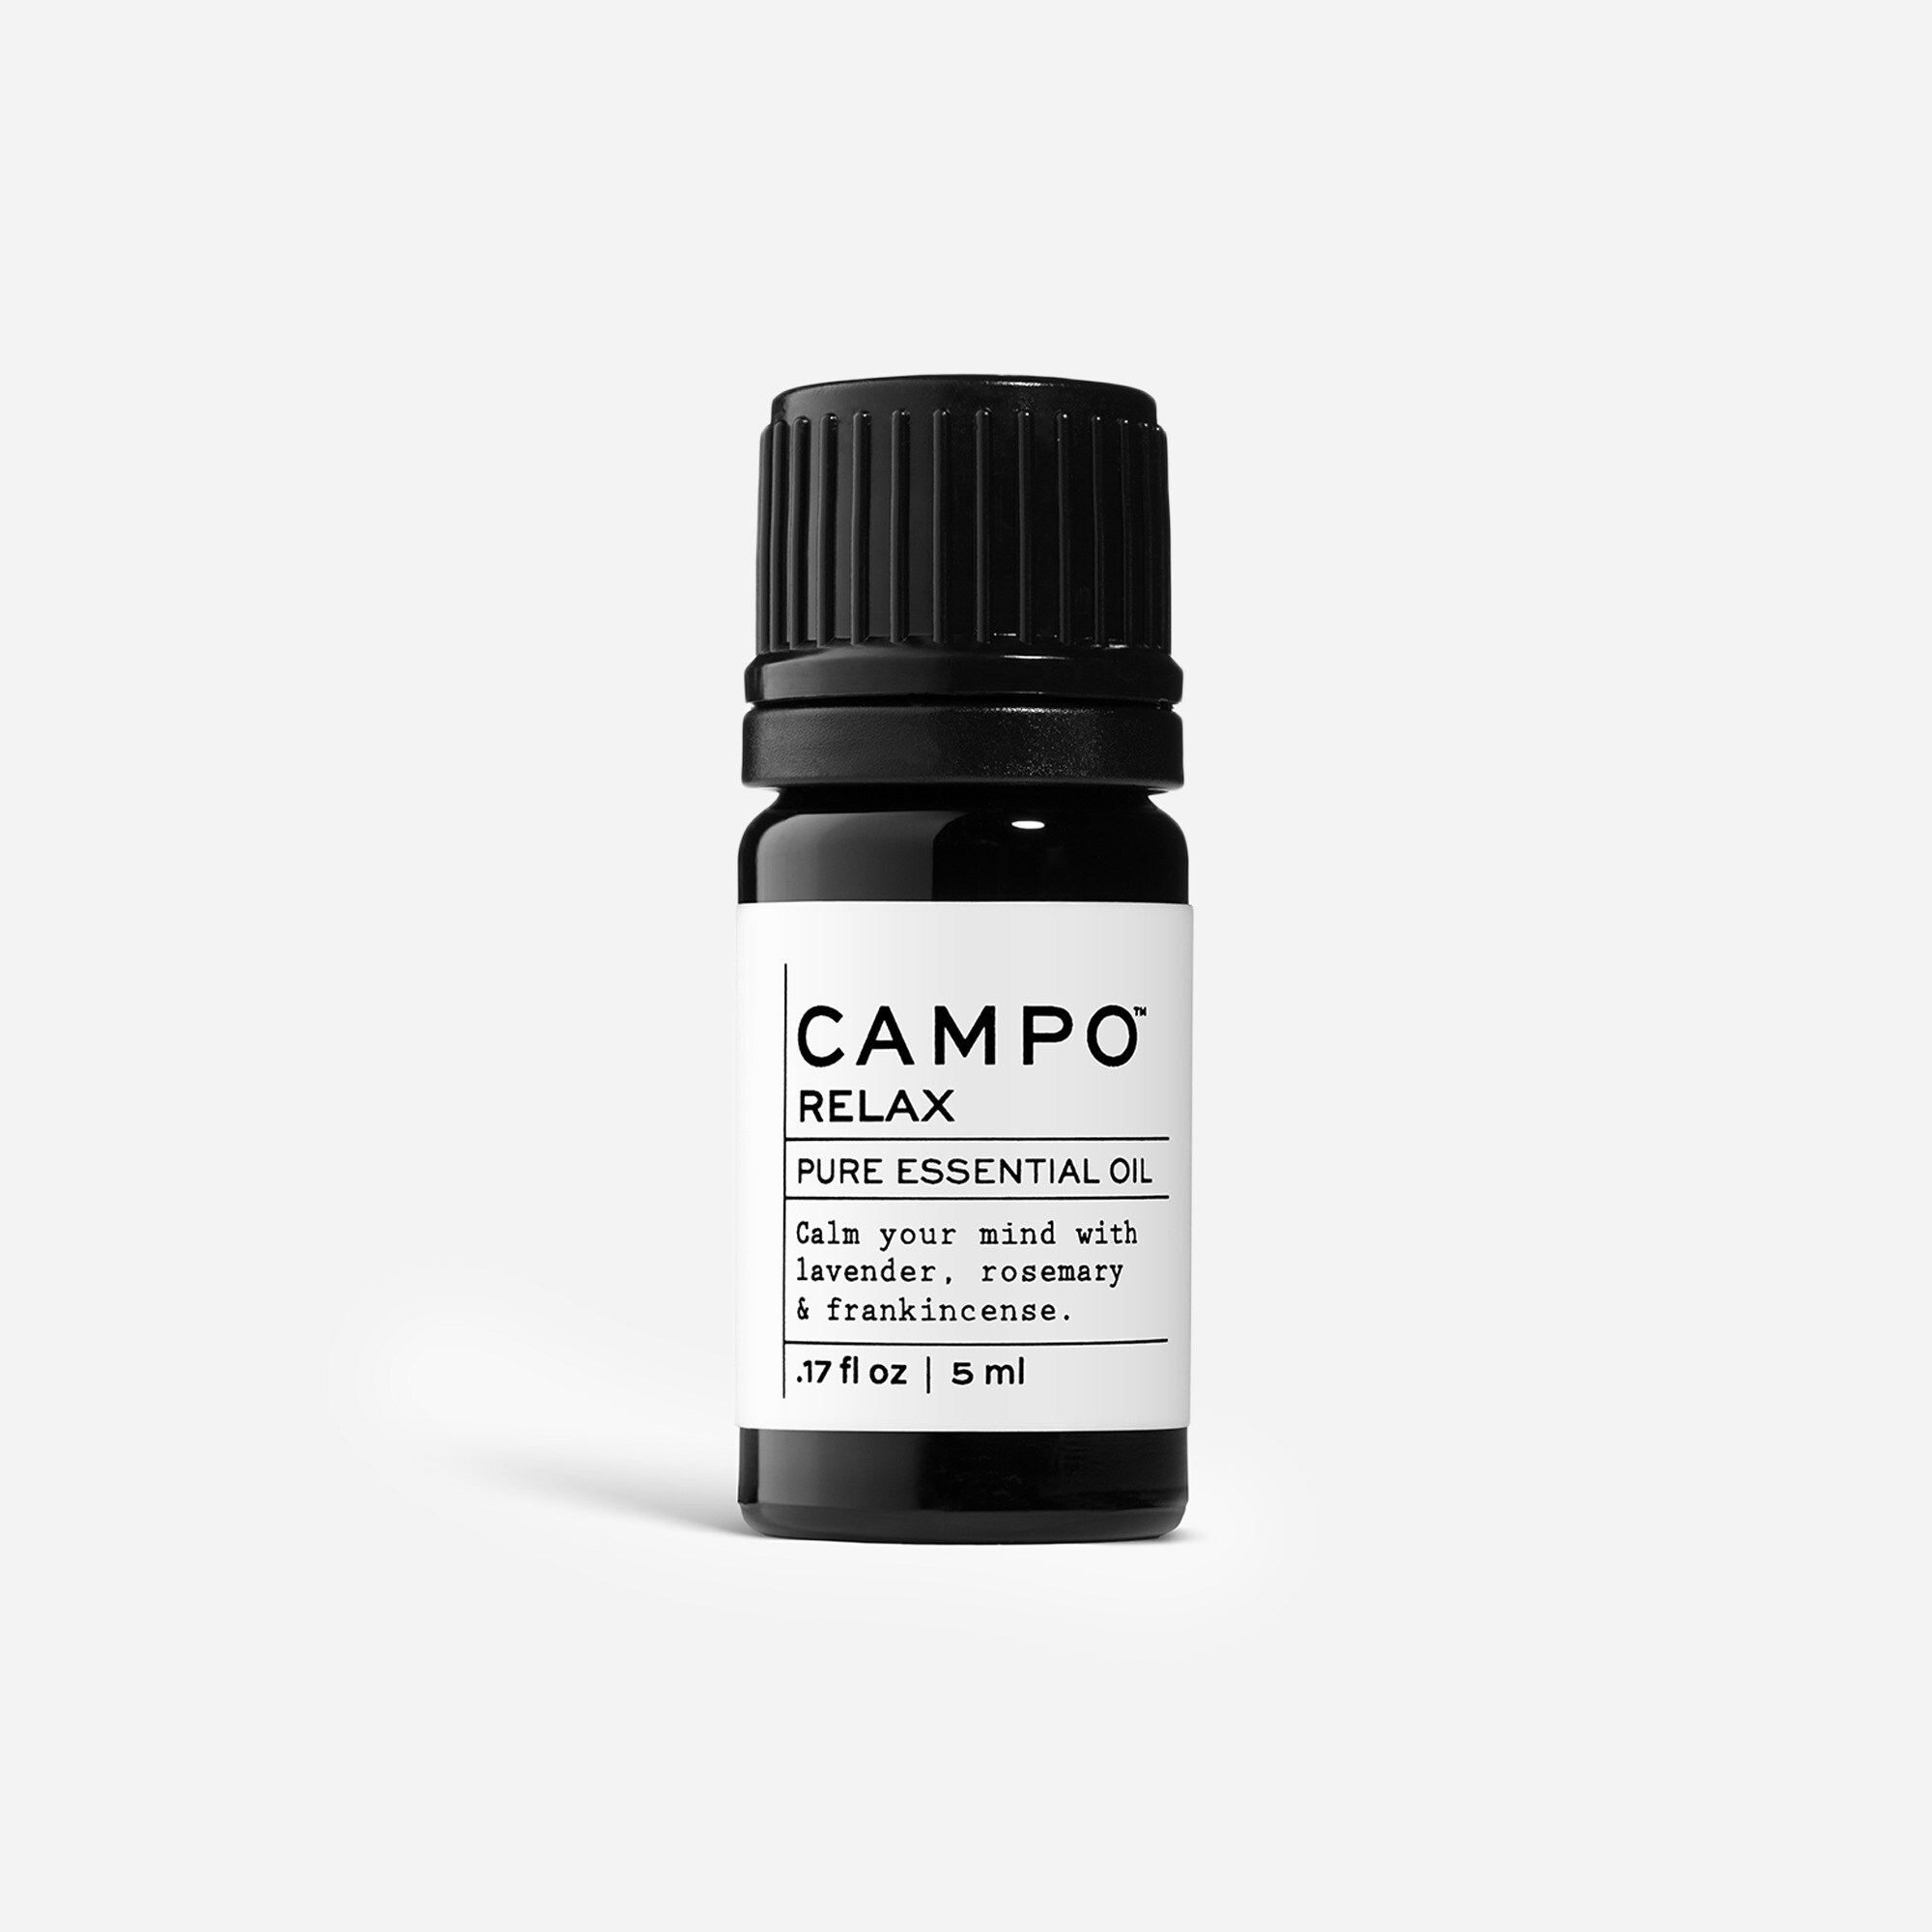 womens CAMPO® RELAX pure essential oil blend